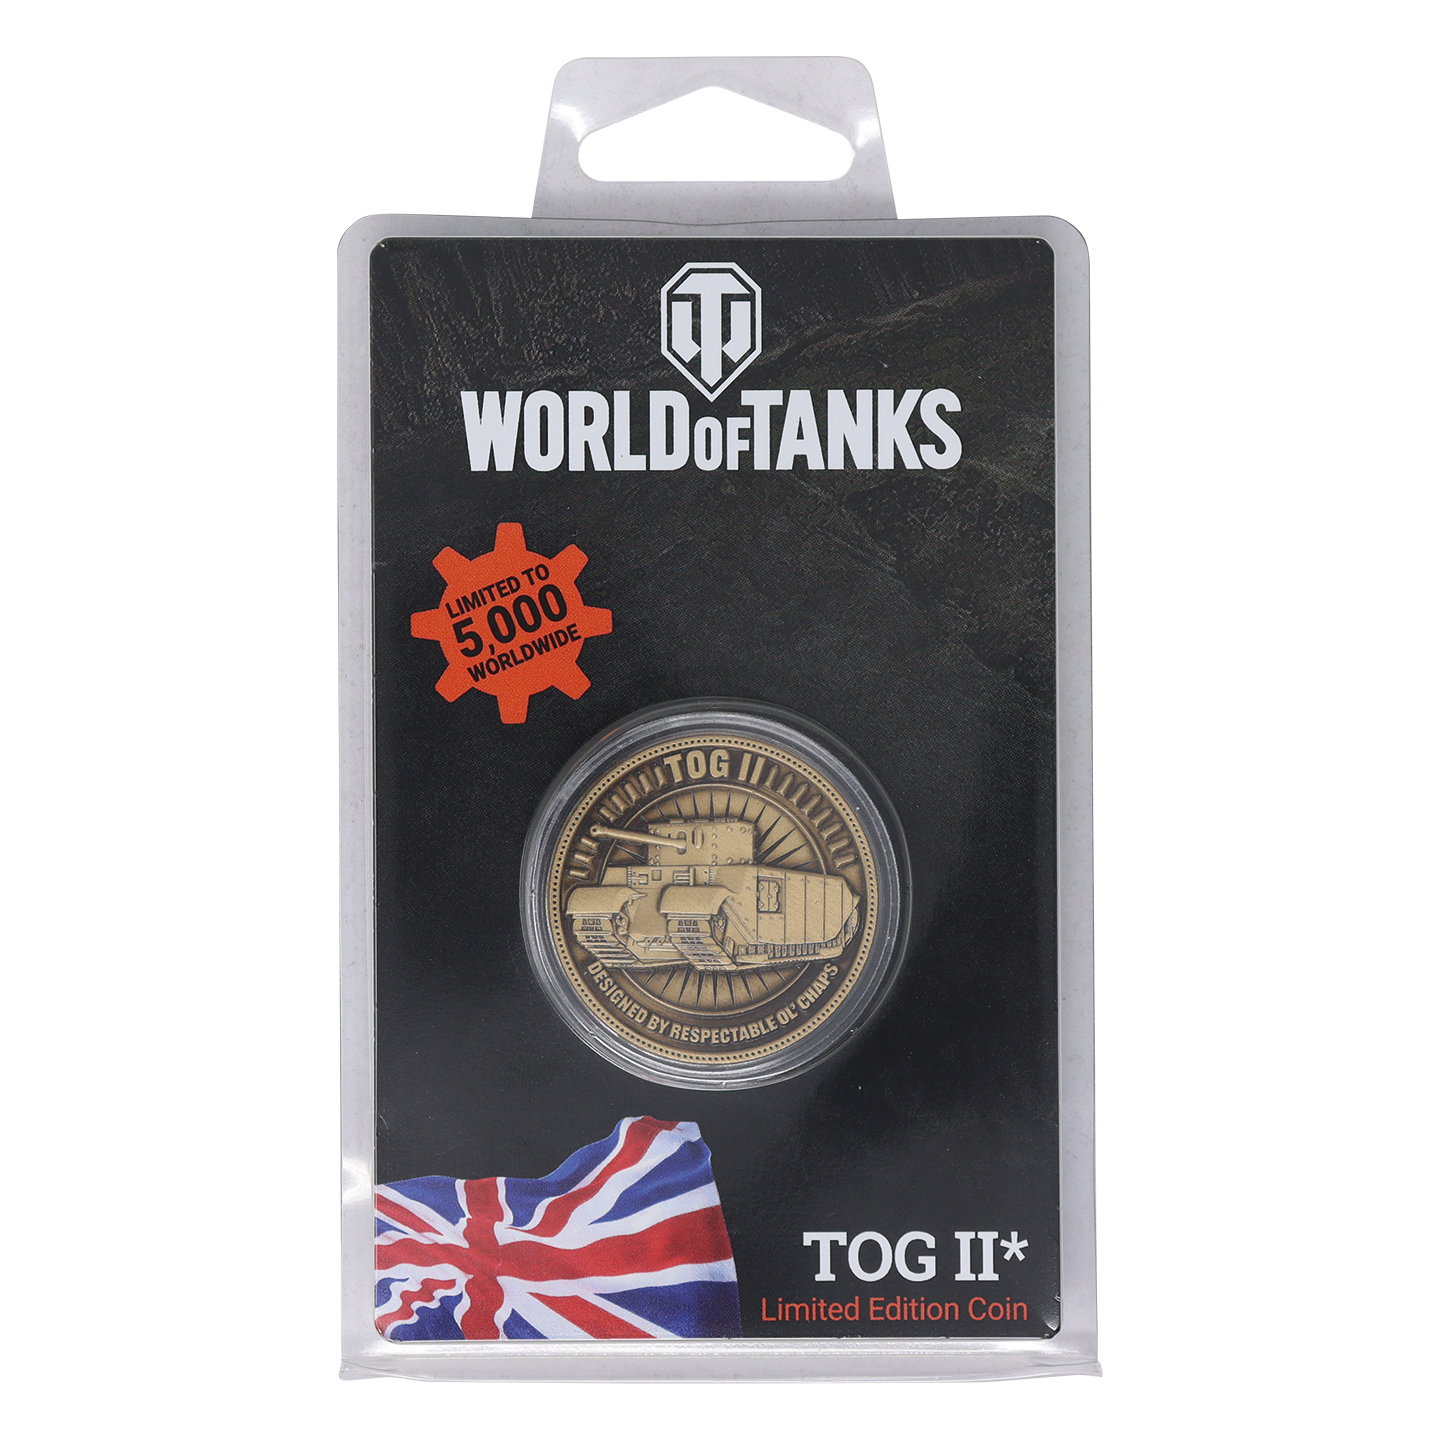 World of Tanks - Tog II Tank Limited Edition Coin